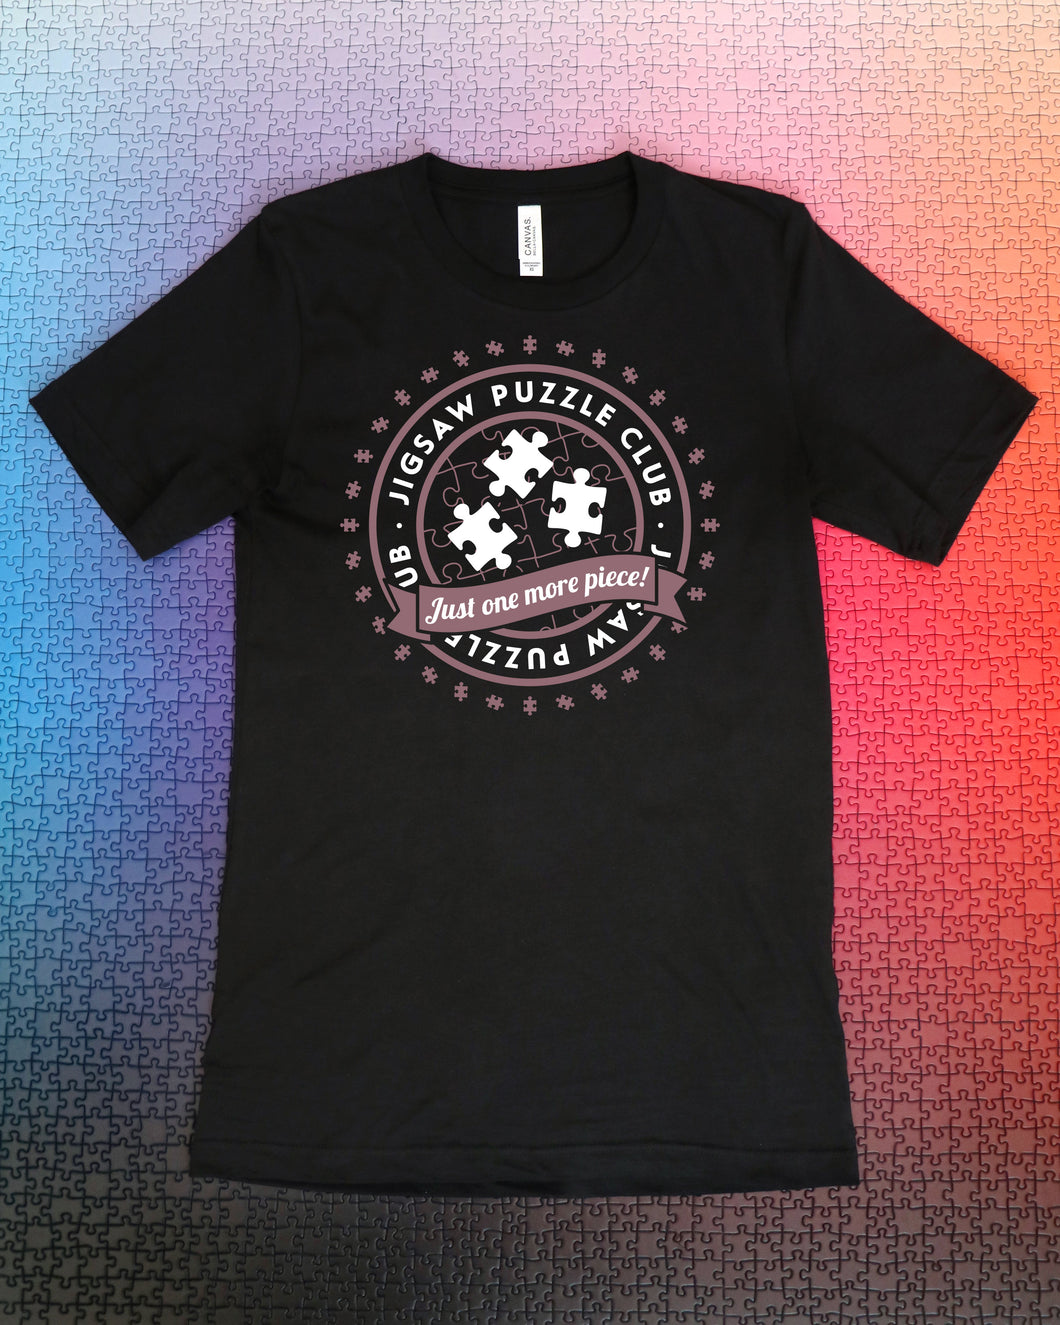 Black t-shirt with the words "Jigsaw Puzzle Club" written in a circle above puzzle pieces and the words "Just One More Piece!" written in a banner. The shirt is laying on top of a gradient puzzle. From Karen Puzzles. 